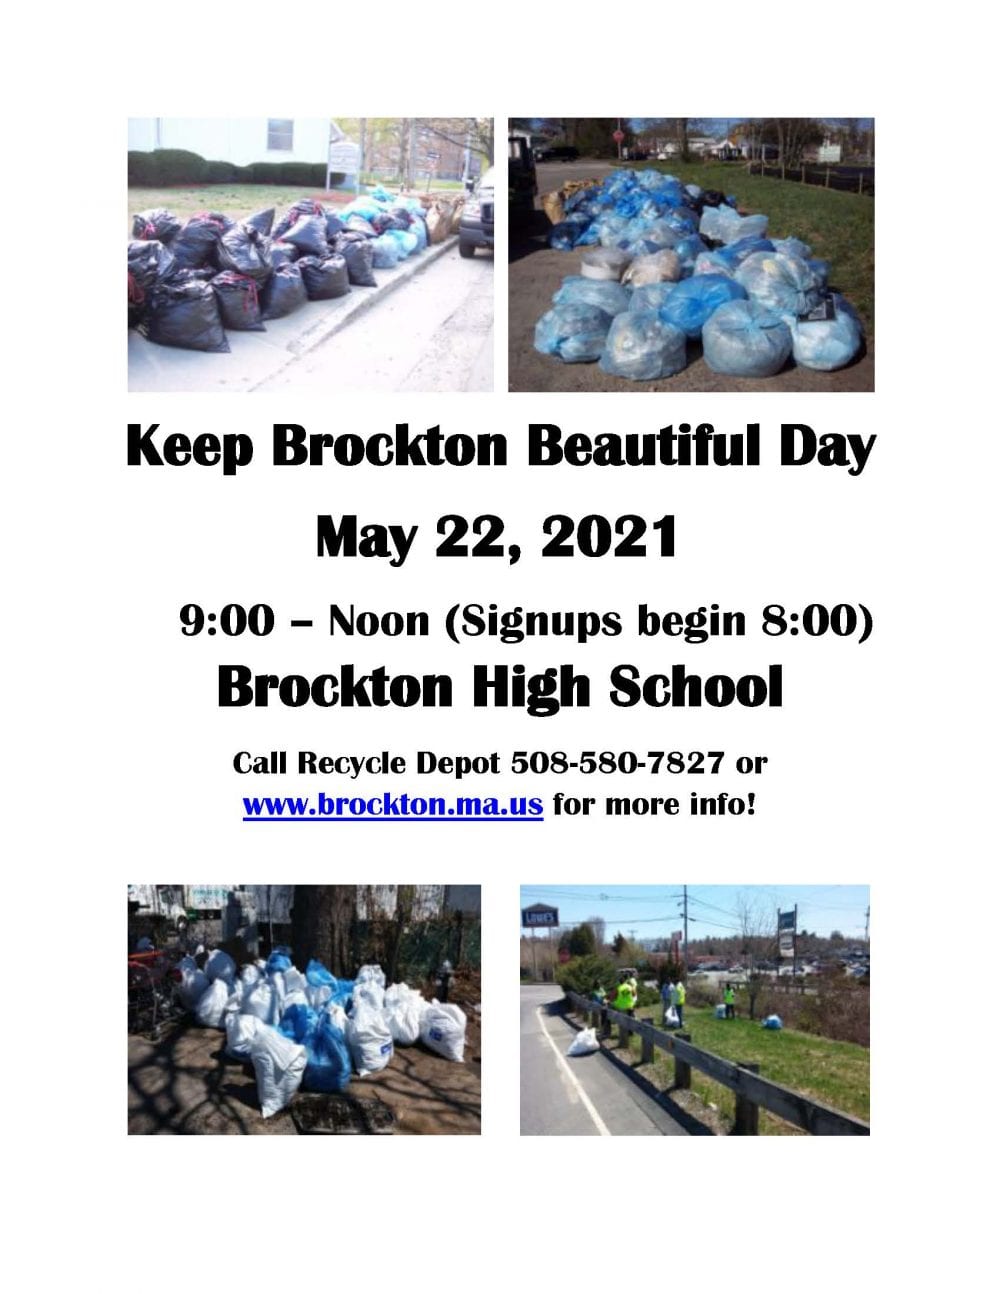 Keep Brockton Beautiful Day Flyer for May 22, 2021